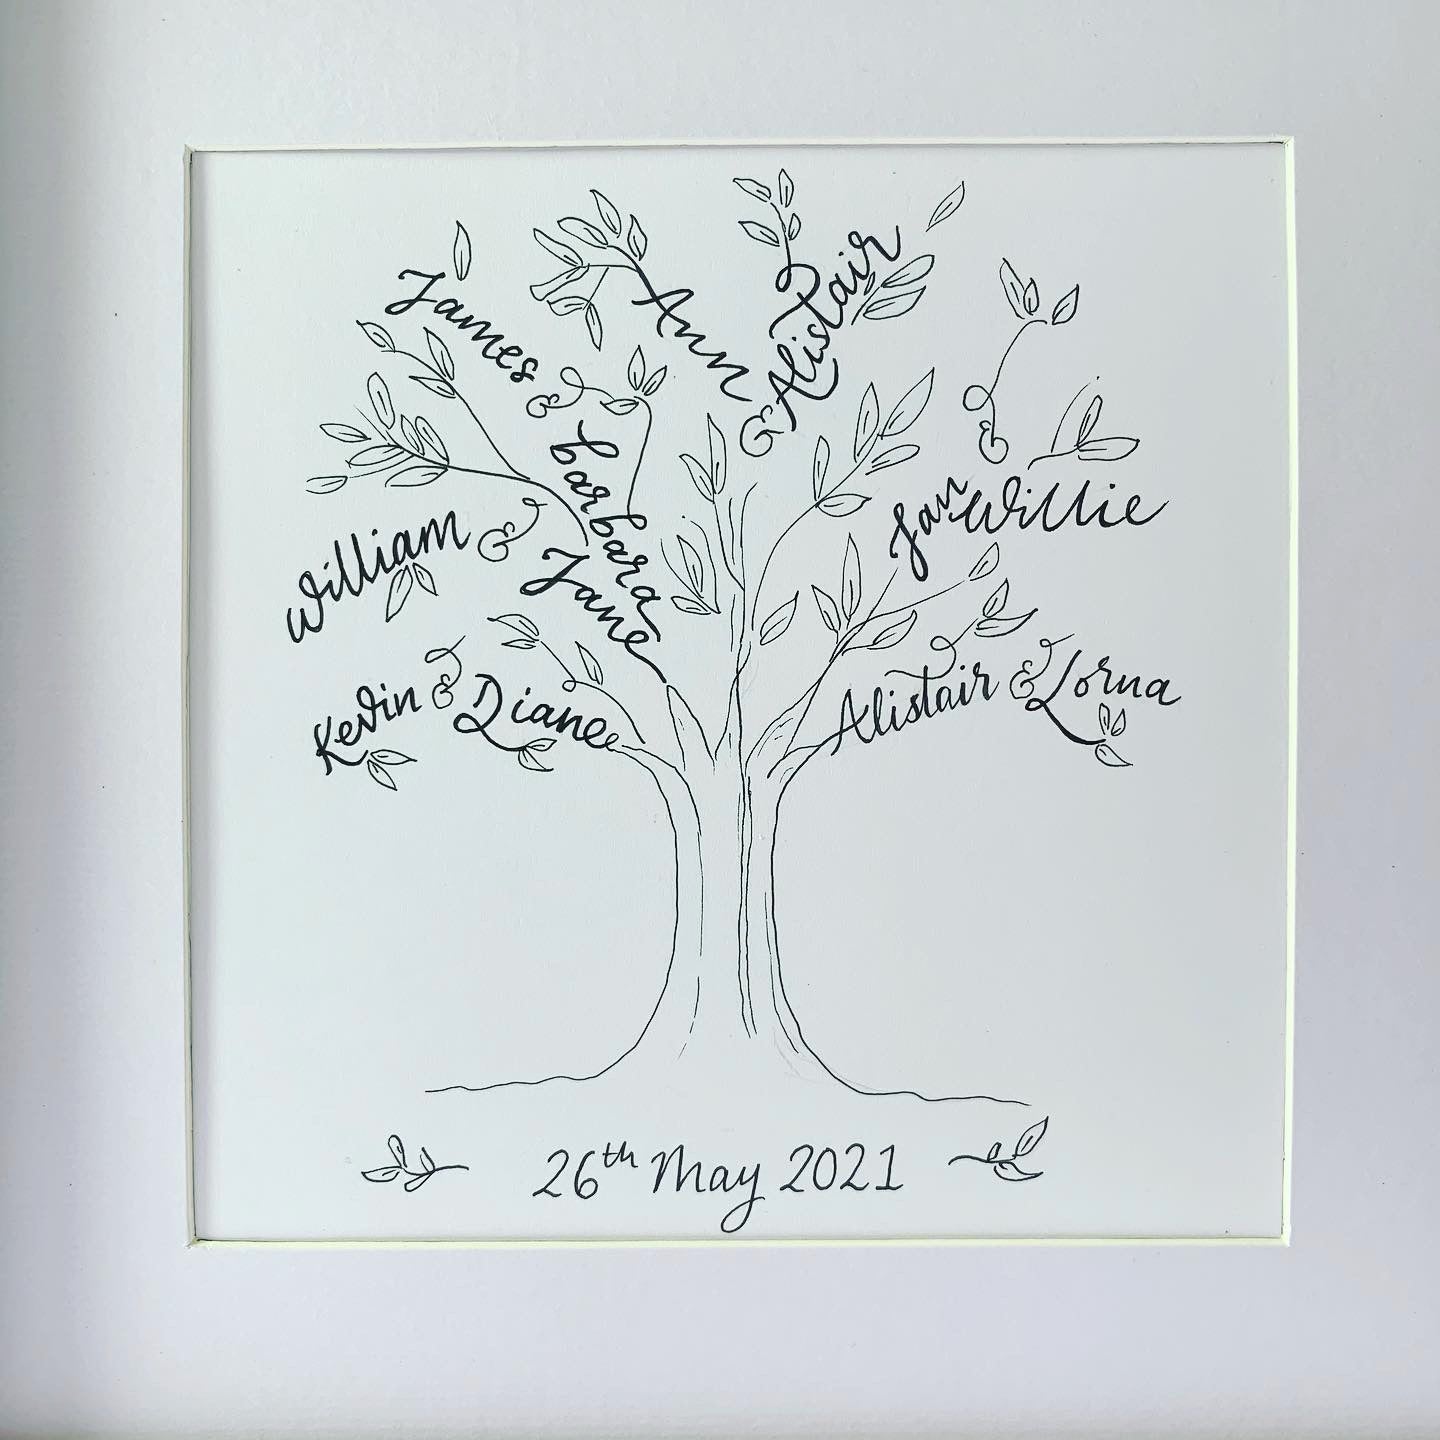 Family Tree Drawing Stock Photos - 33,406 Images | Shutterstock